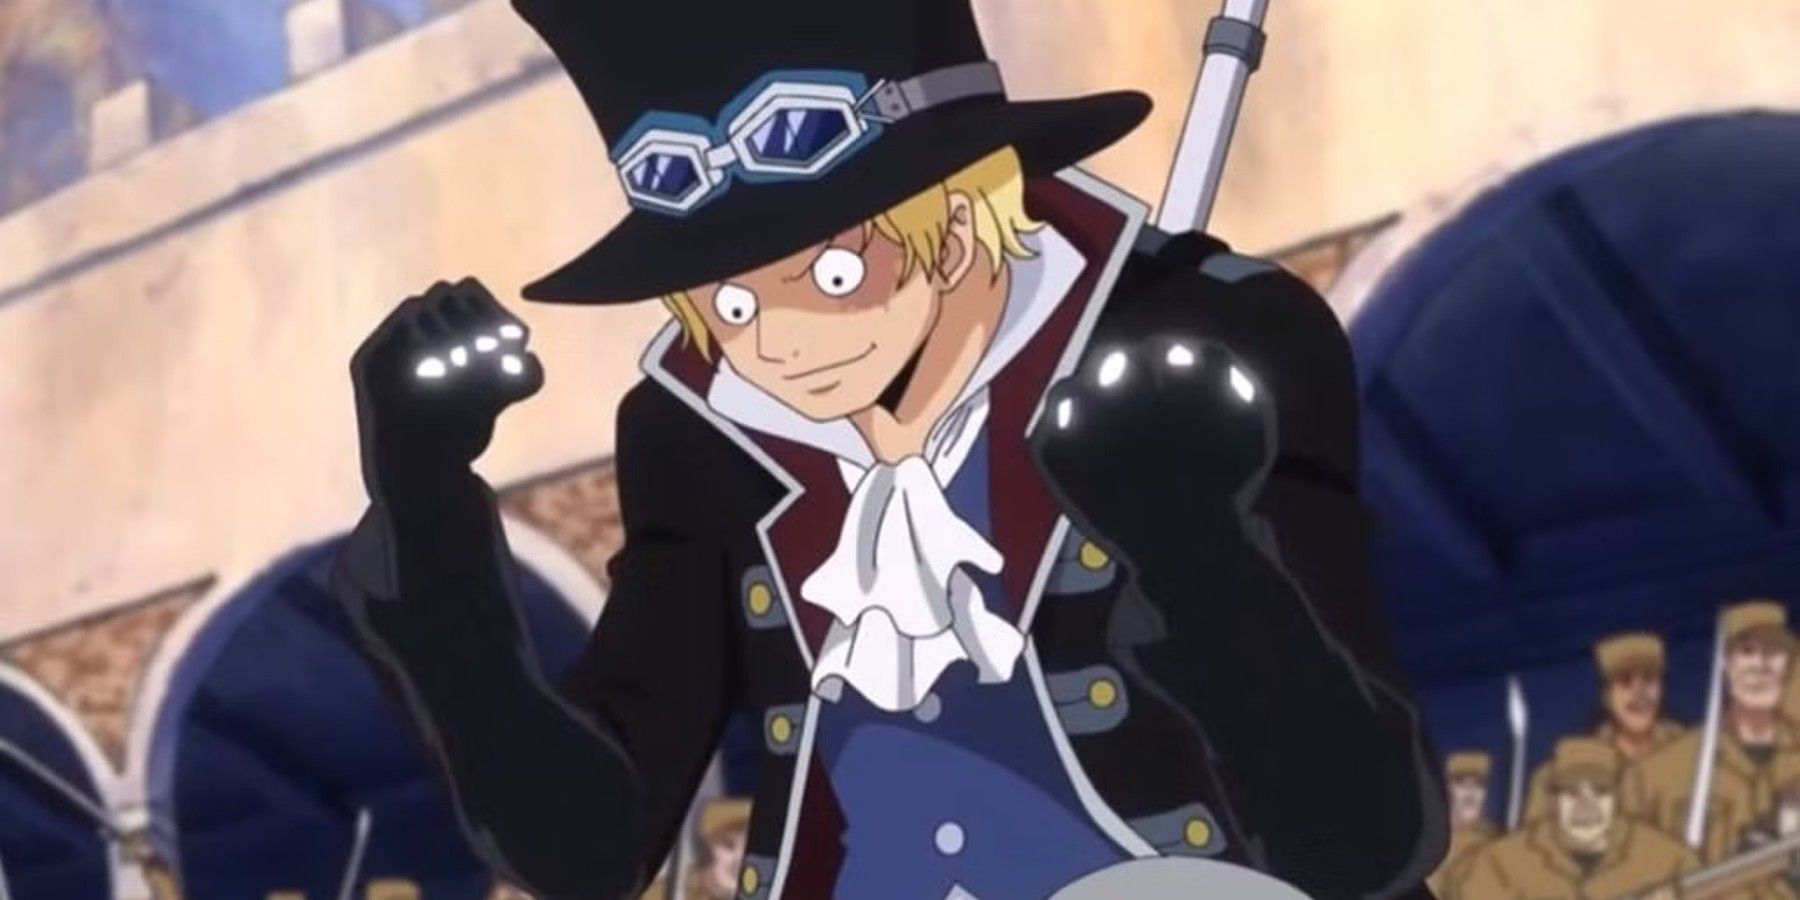 Sabo Infusing his hands with Armament Haki so he can fight soldiers in One Piece